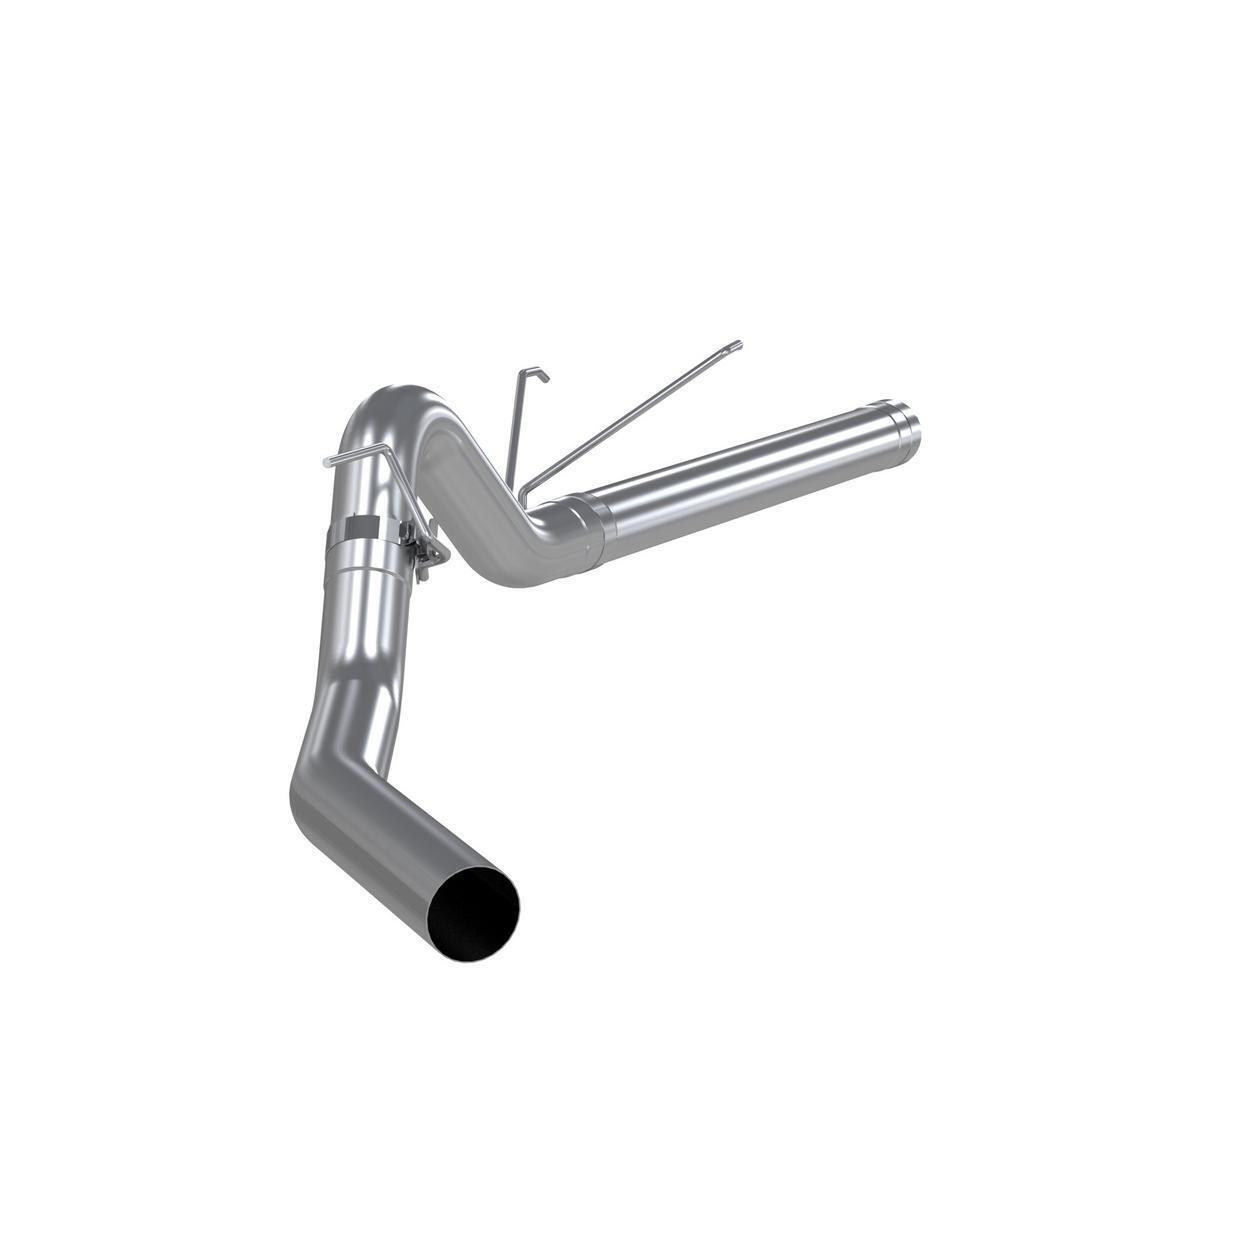 Exhaust System Kit for 2008-2009 Dodge Ram 3500